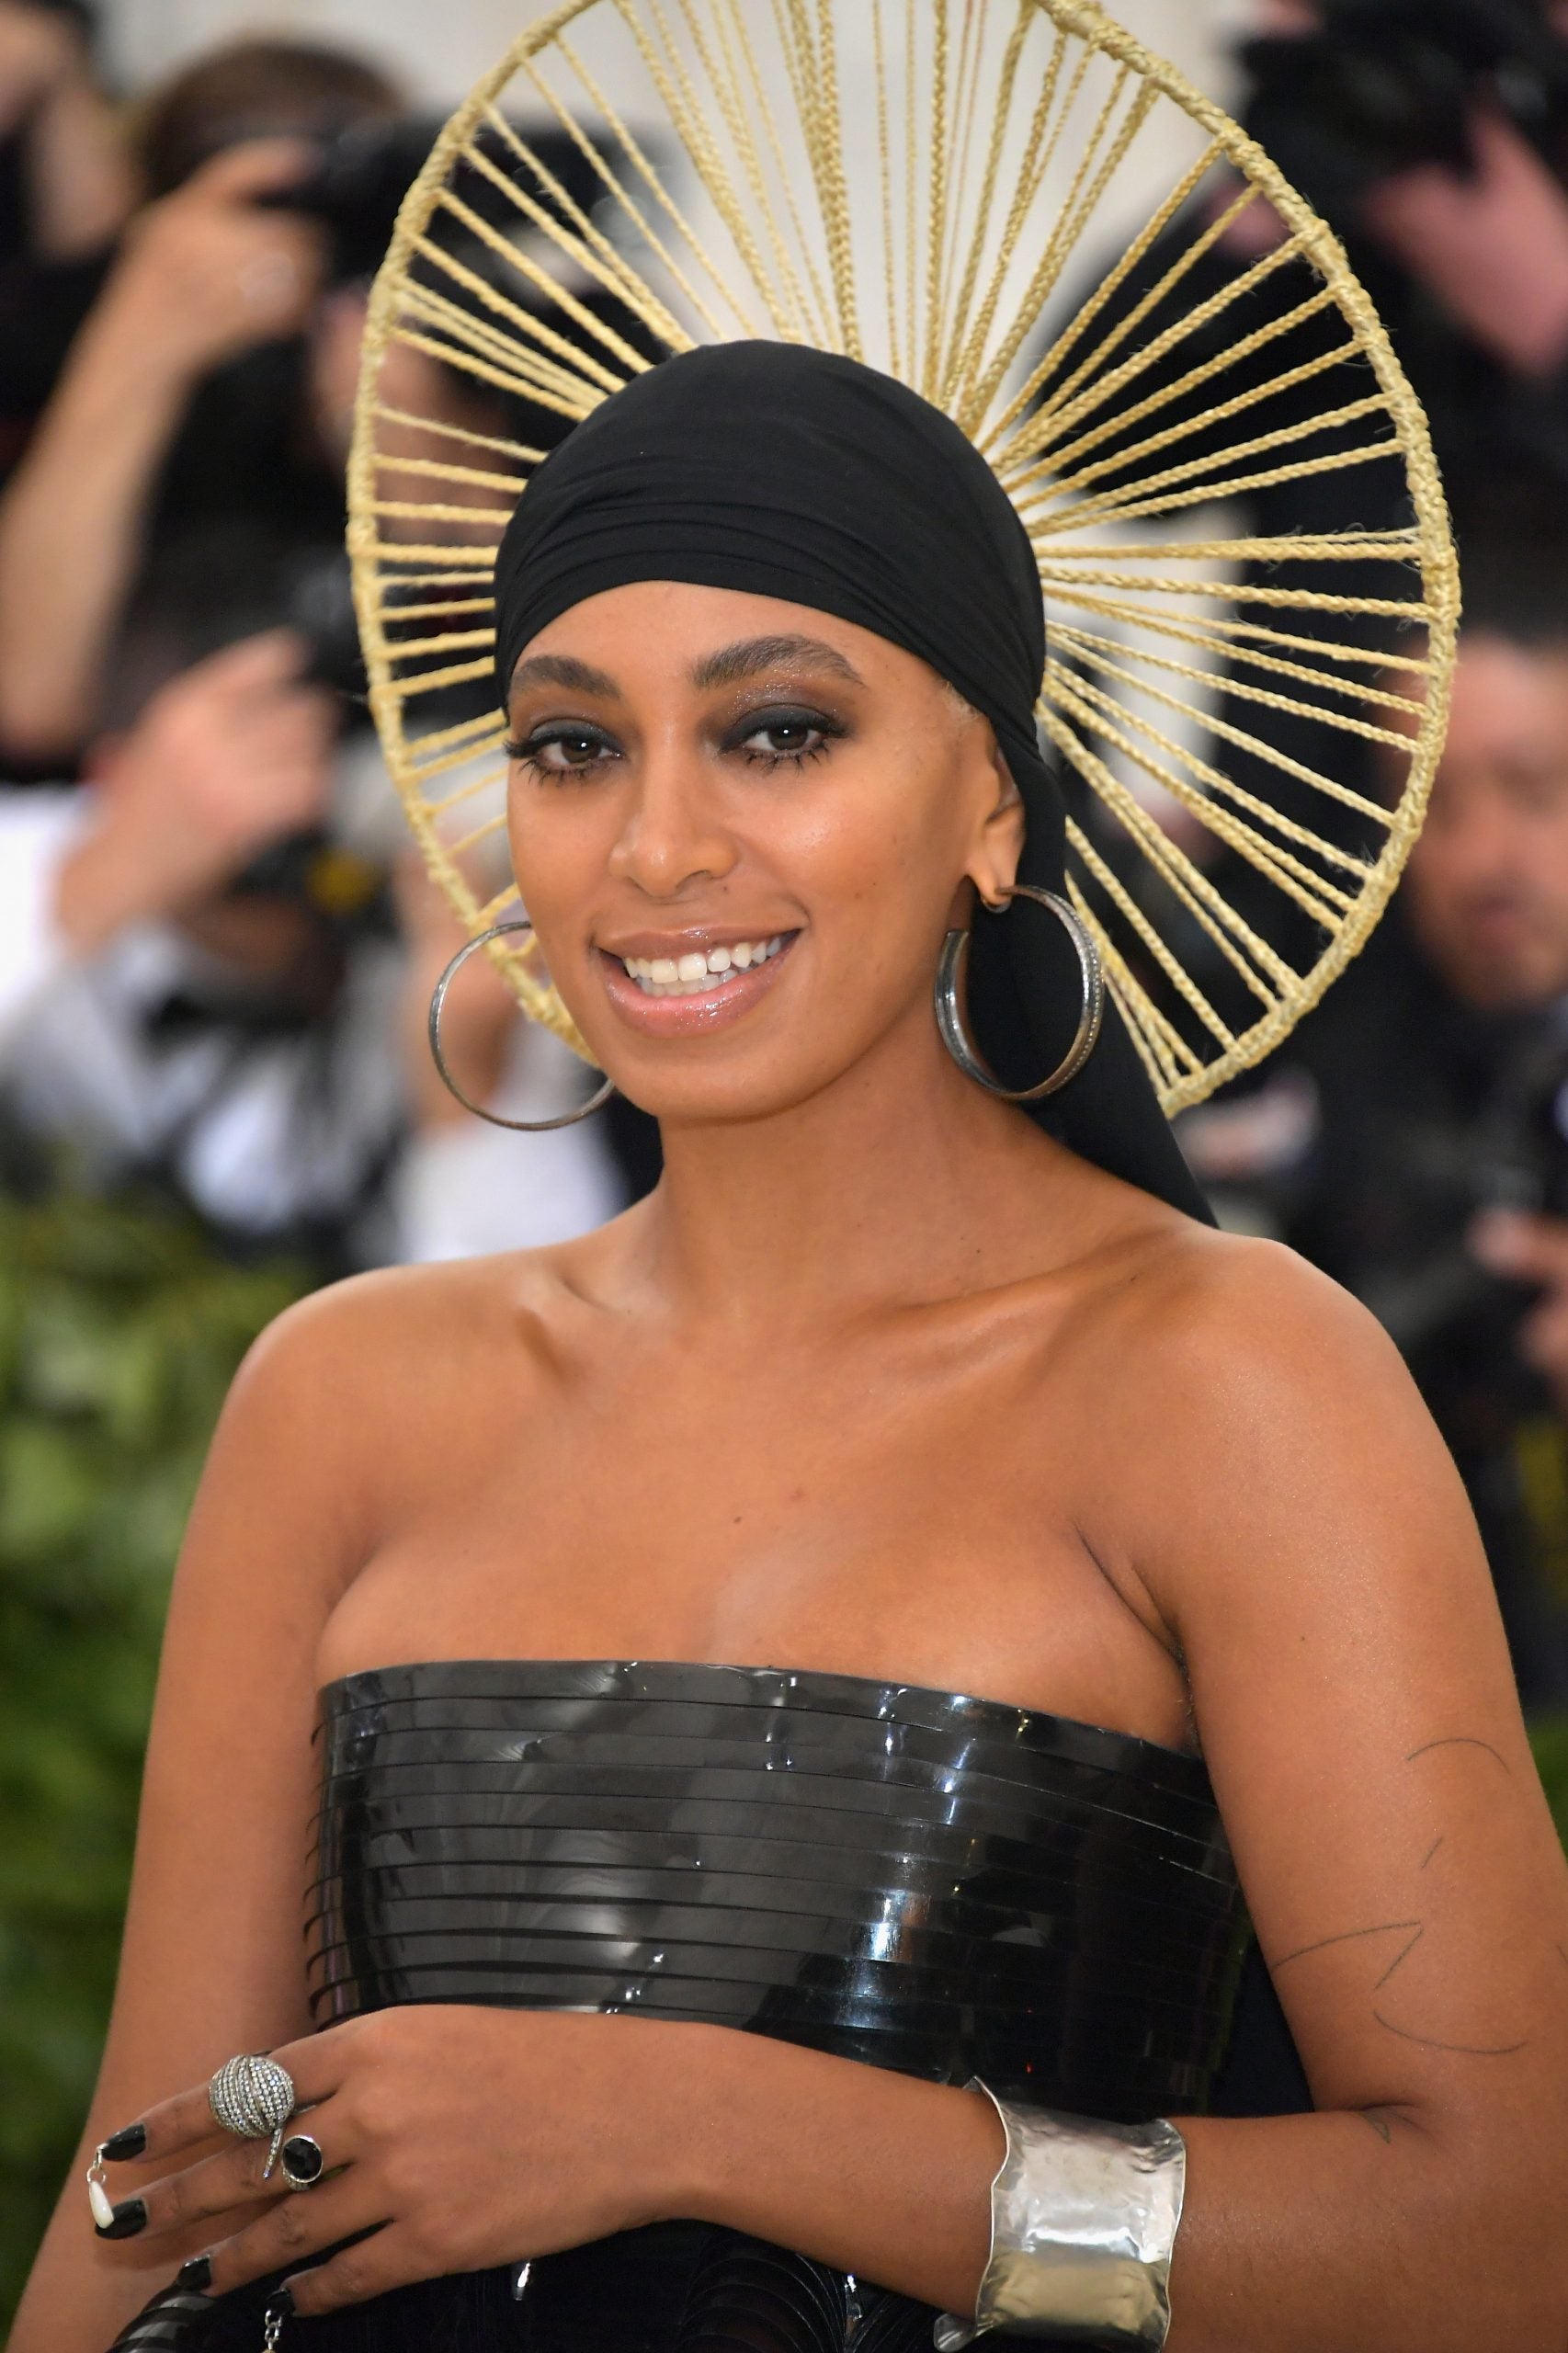 The Met Gala Might Be Postponed, But These Past Beauty Moments Live On